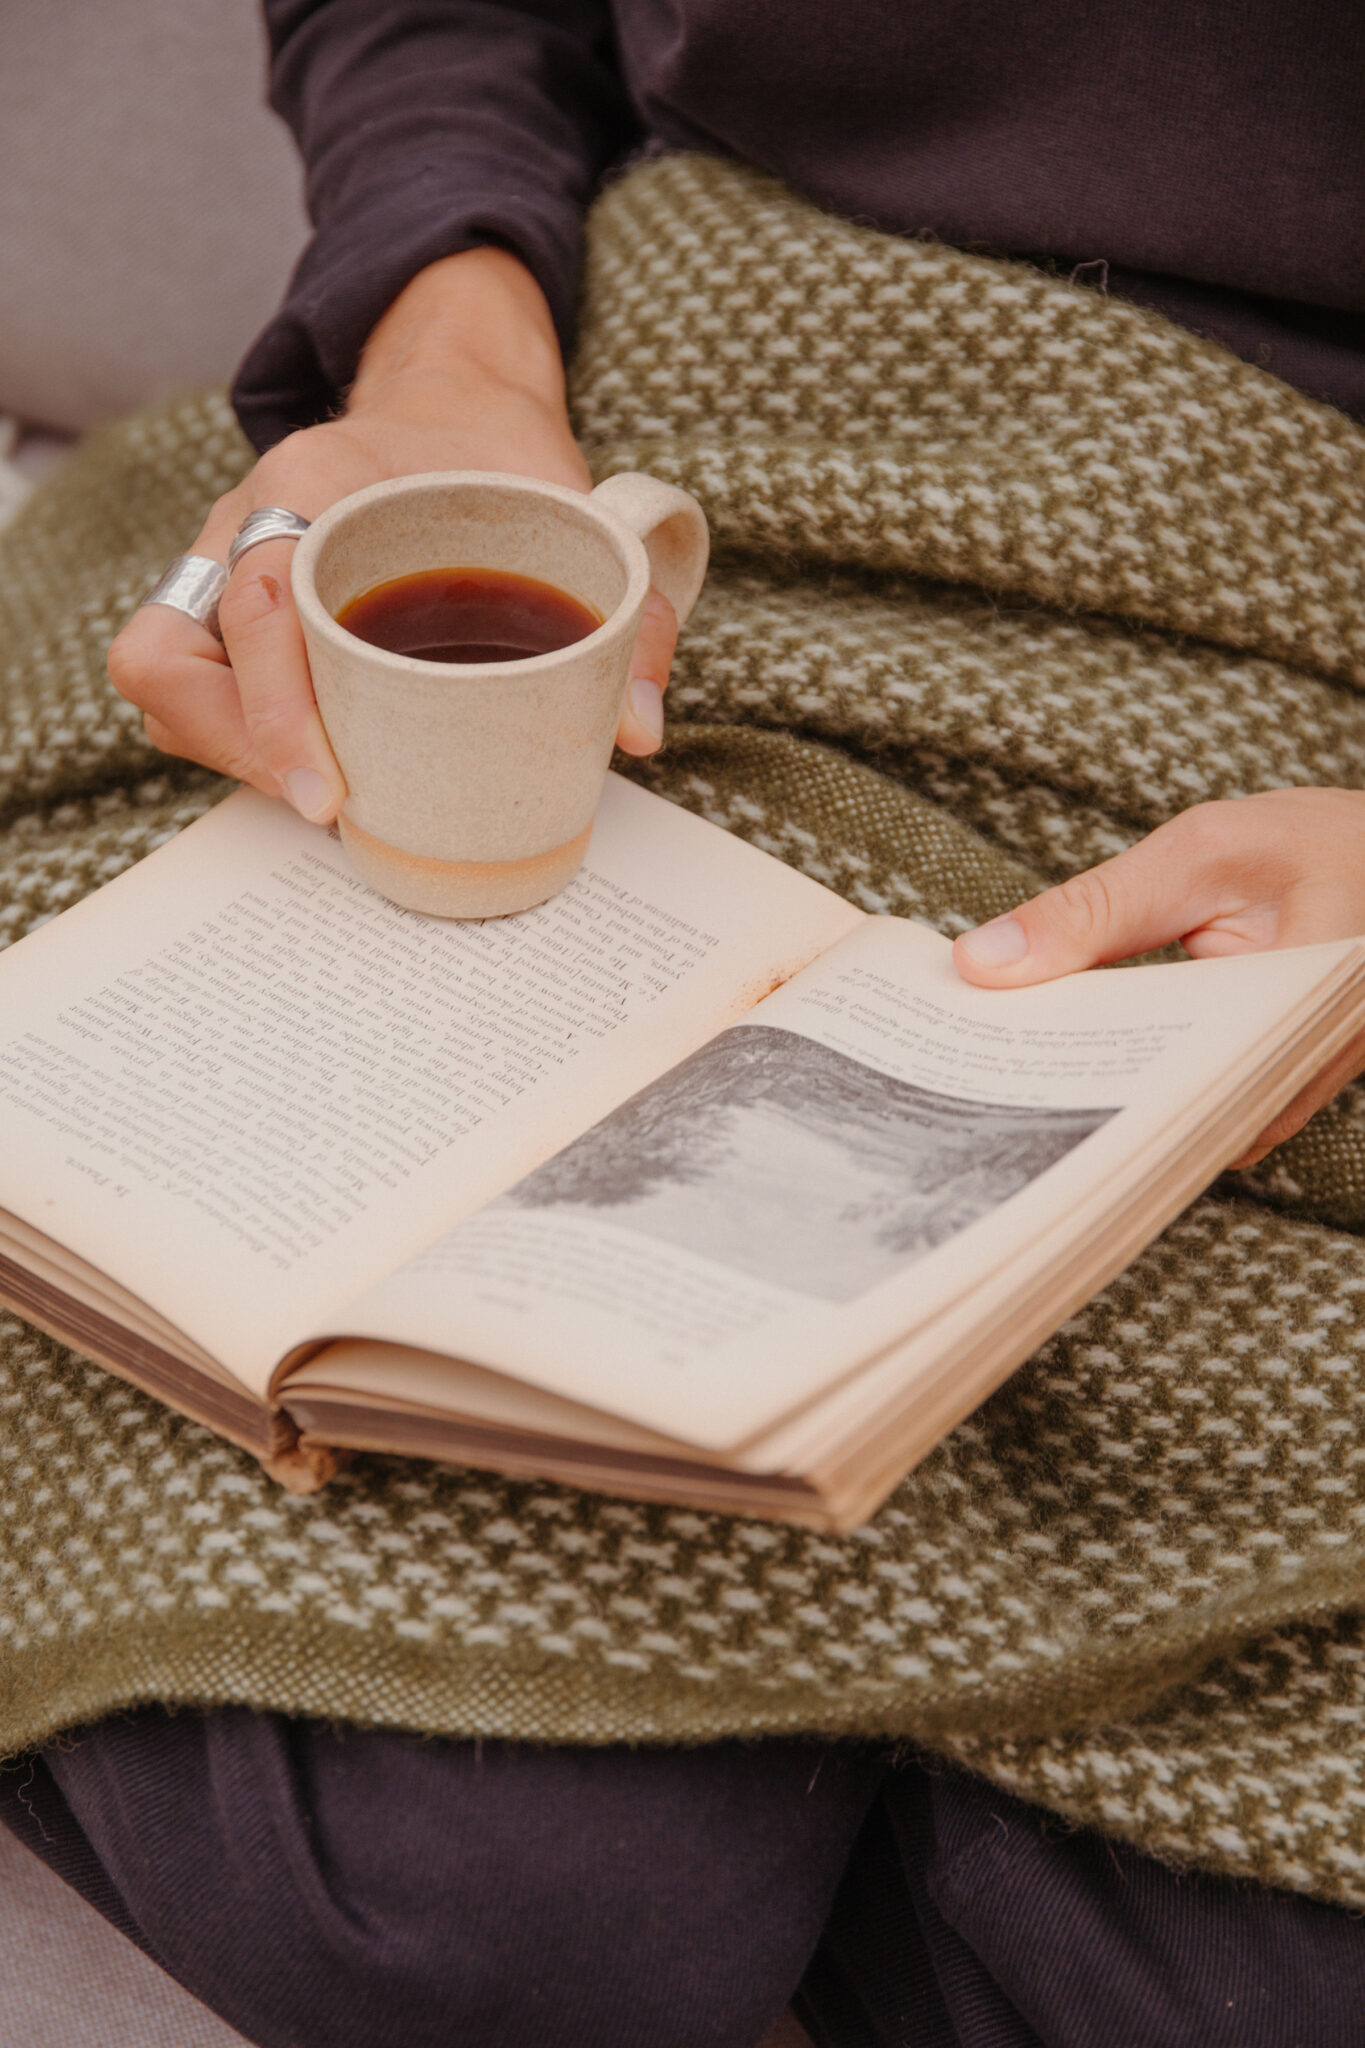 Reading a book with a blanket and a cup of coffee